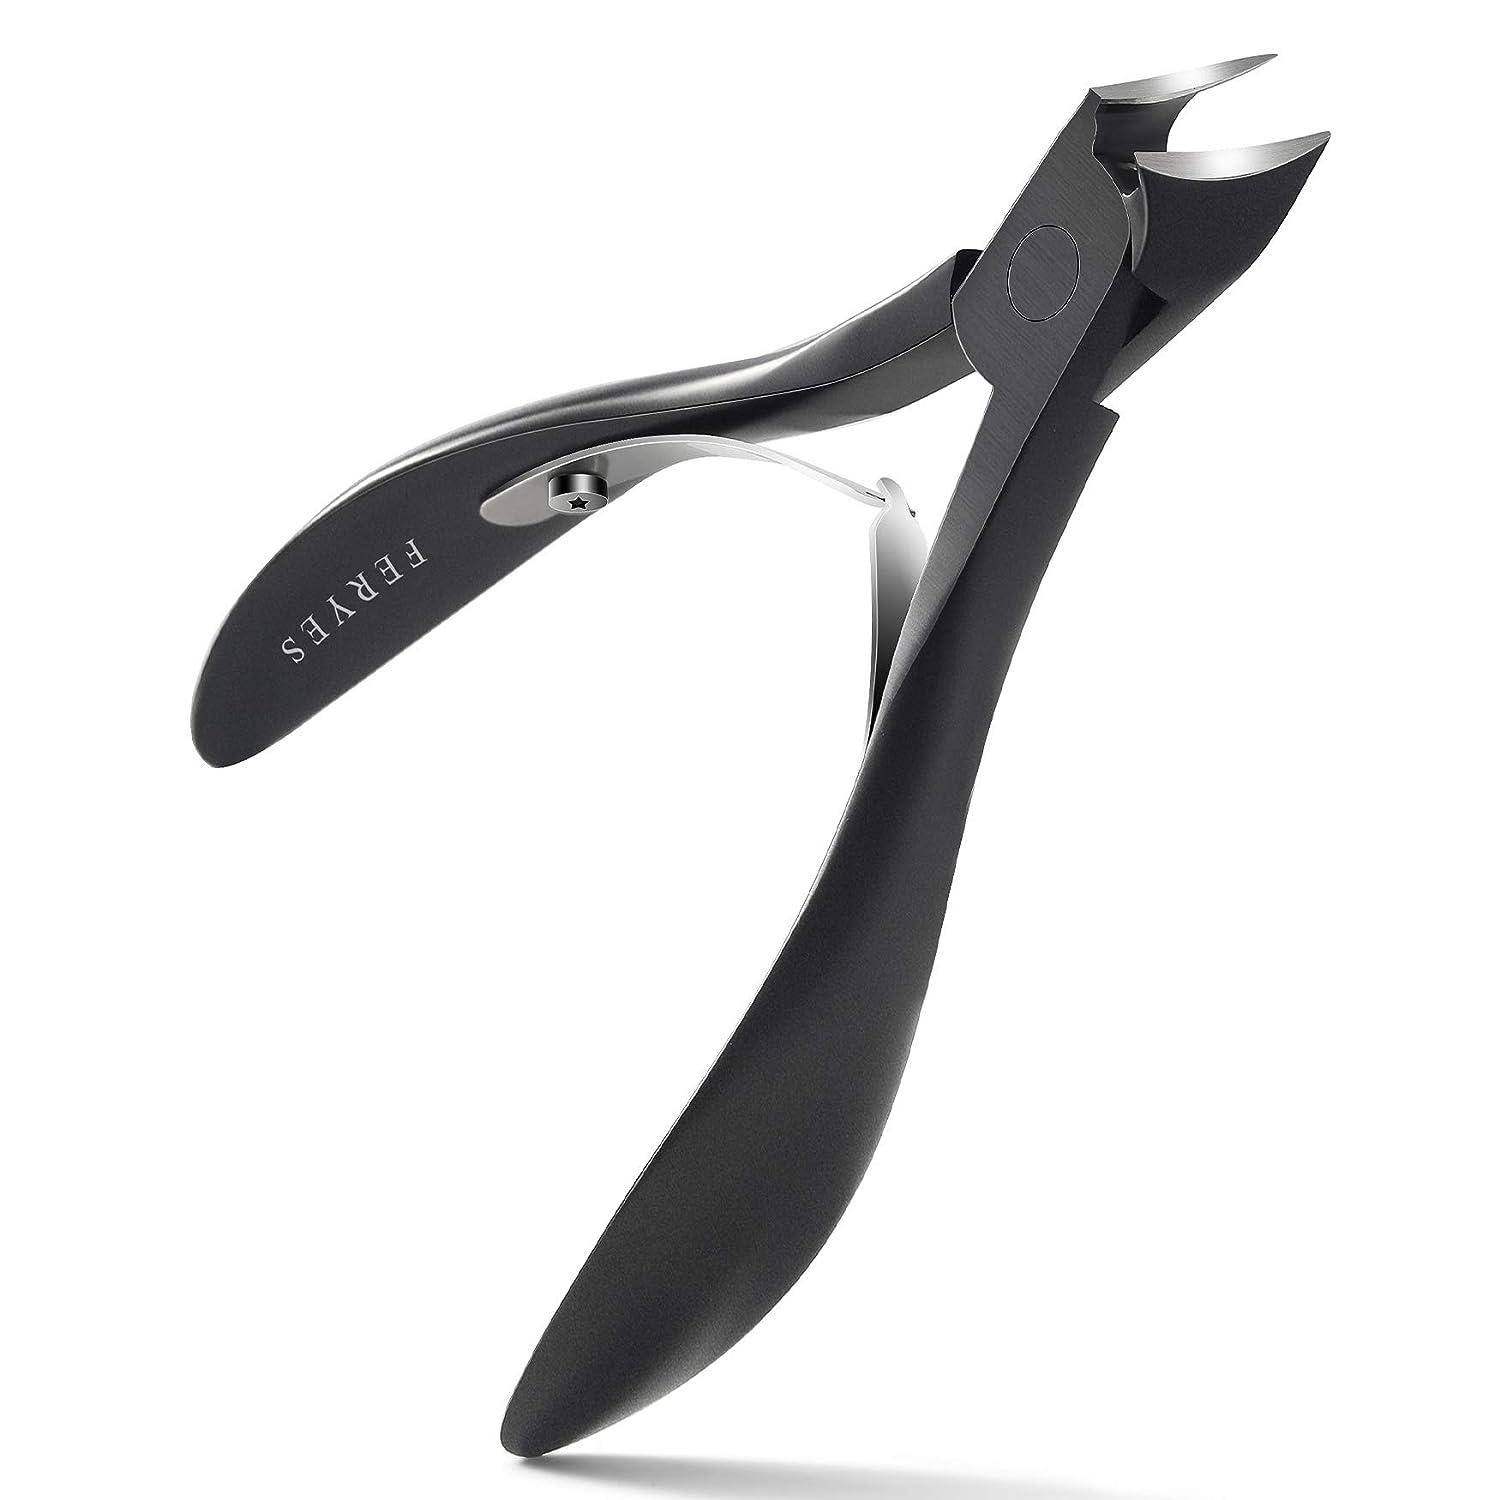 FERYES Precision Toenail Clipper for Thick or Ingrown Toenails, 4R13  Stainless Steel Nail Cutter, Podiatrist Recommended Manicure Pedicure  Clipper - BLACK